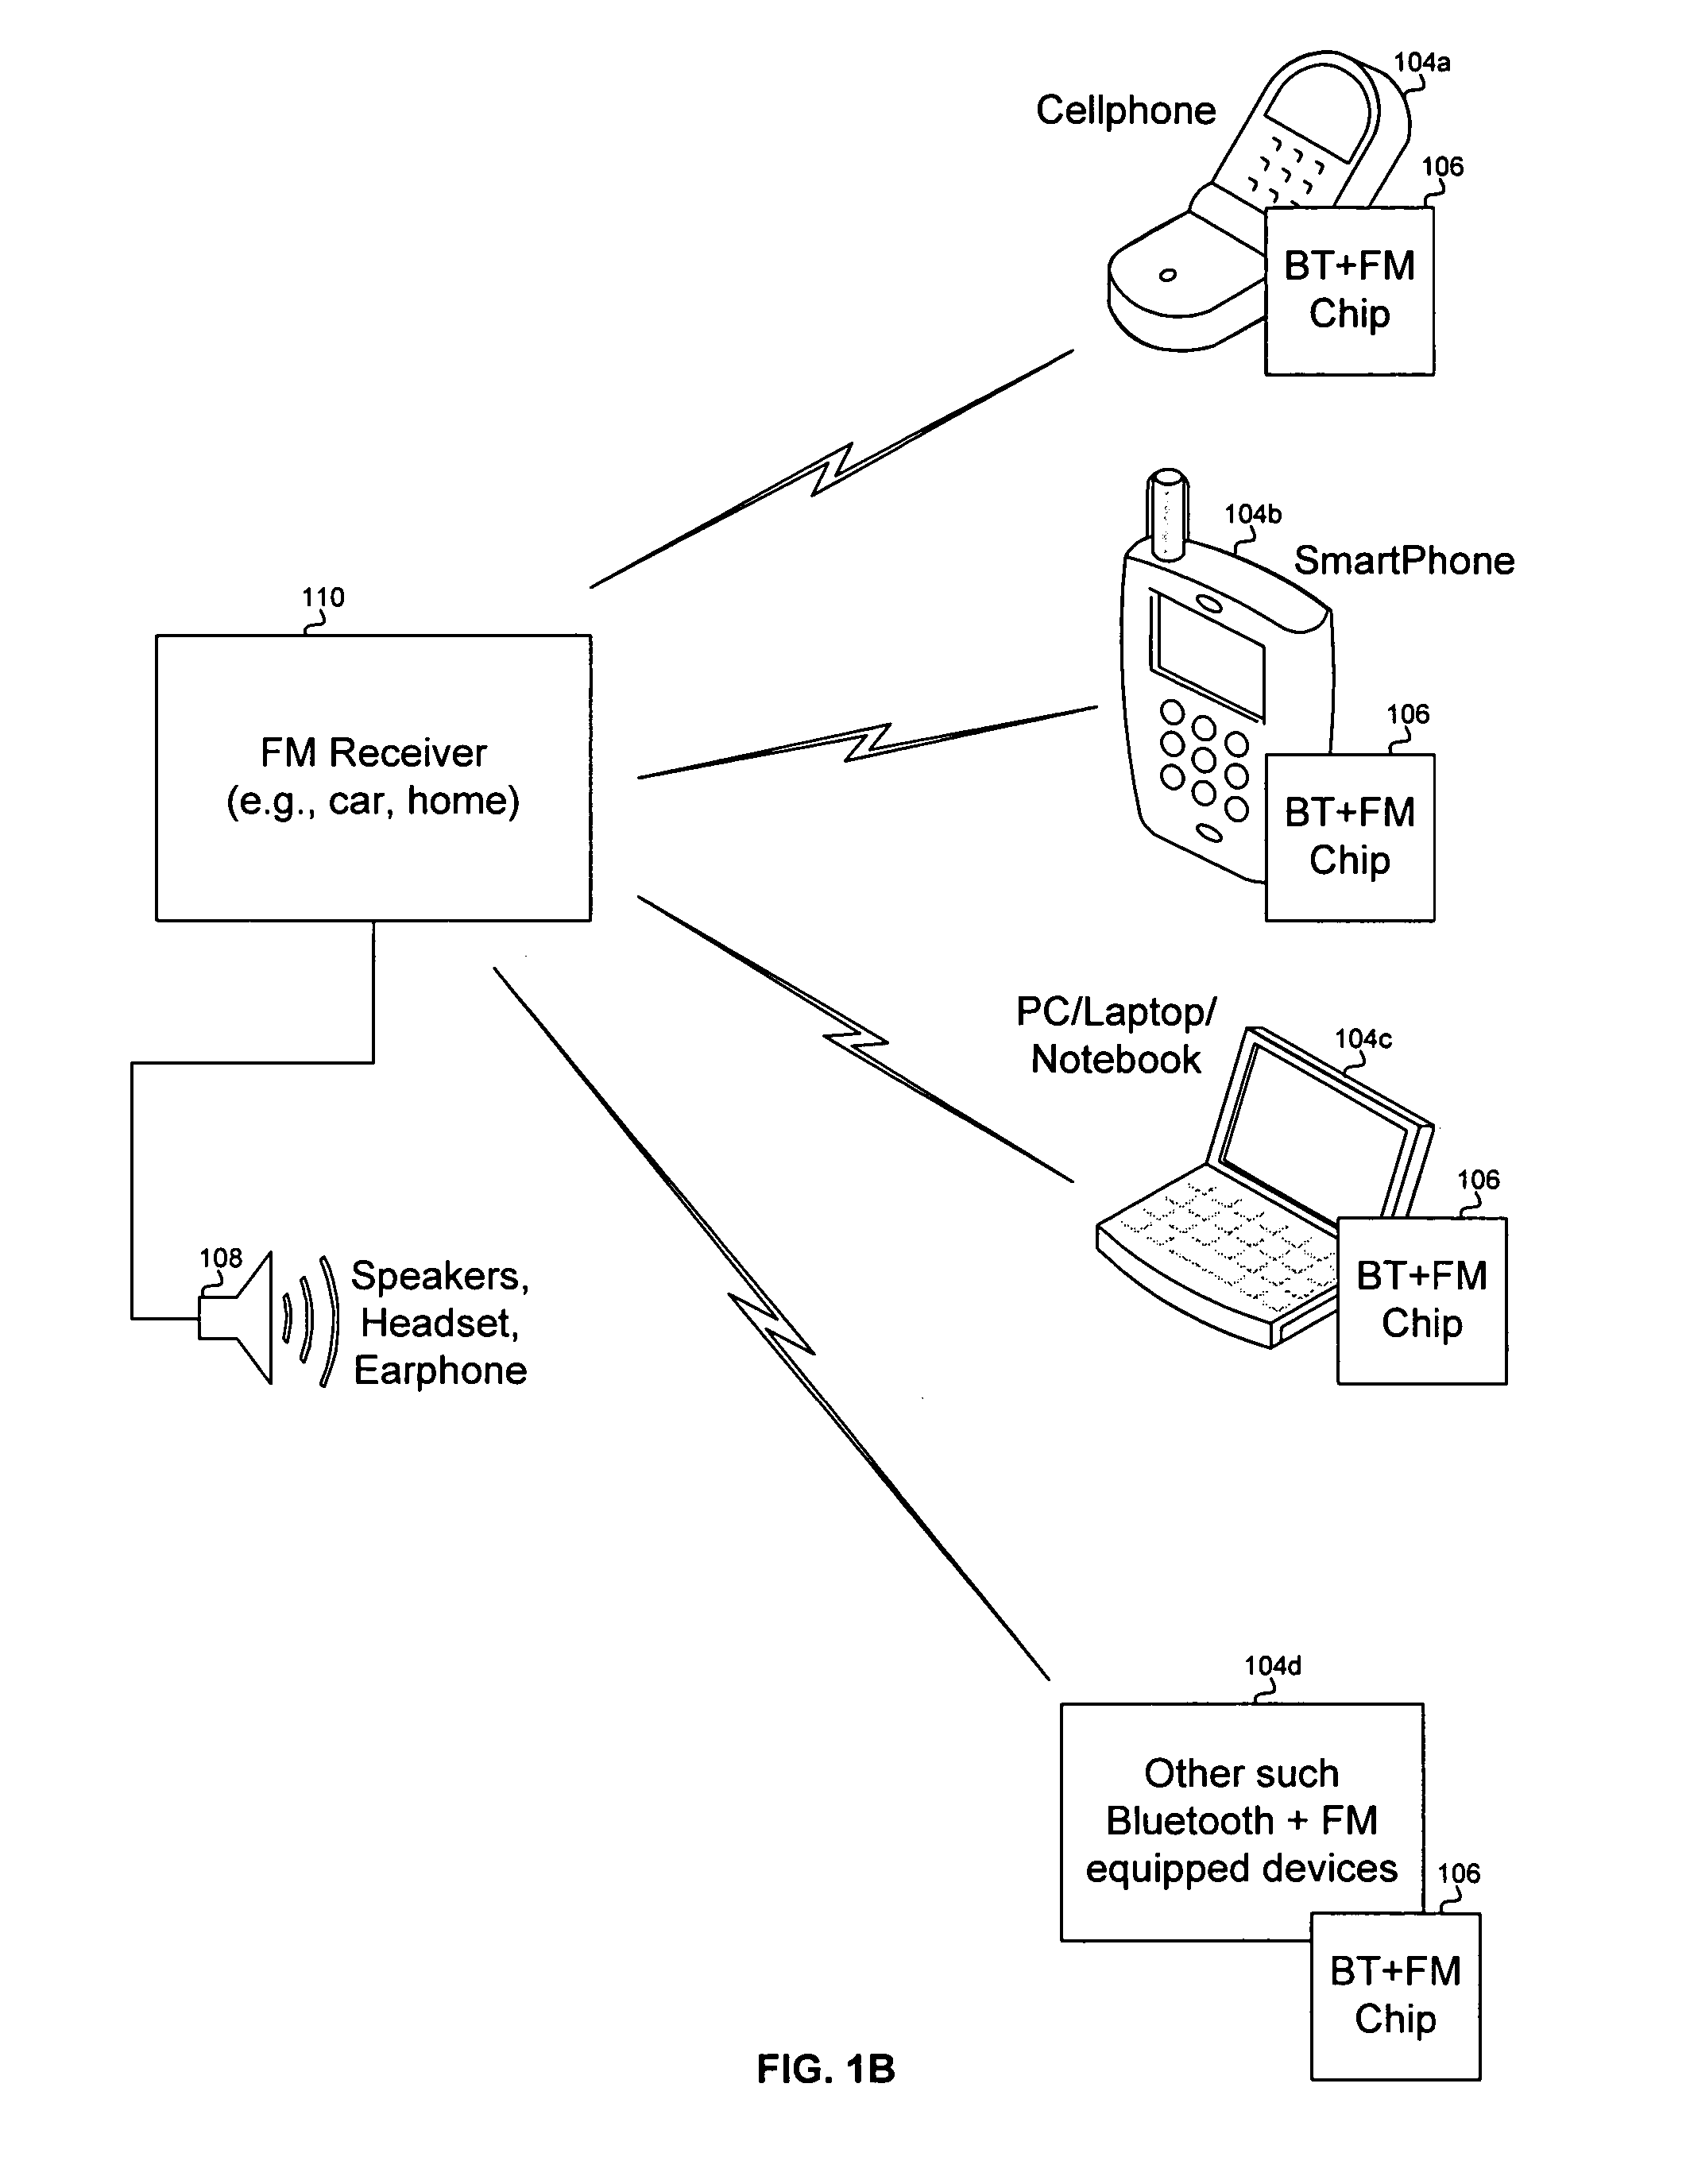 Method and system for routing FM data to a bluetooth enabled device via a bluetooth link